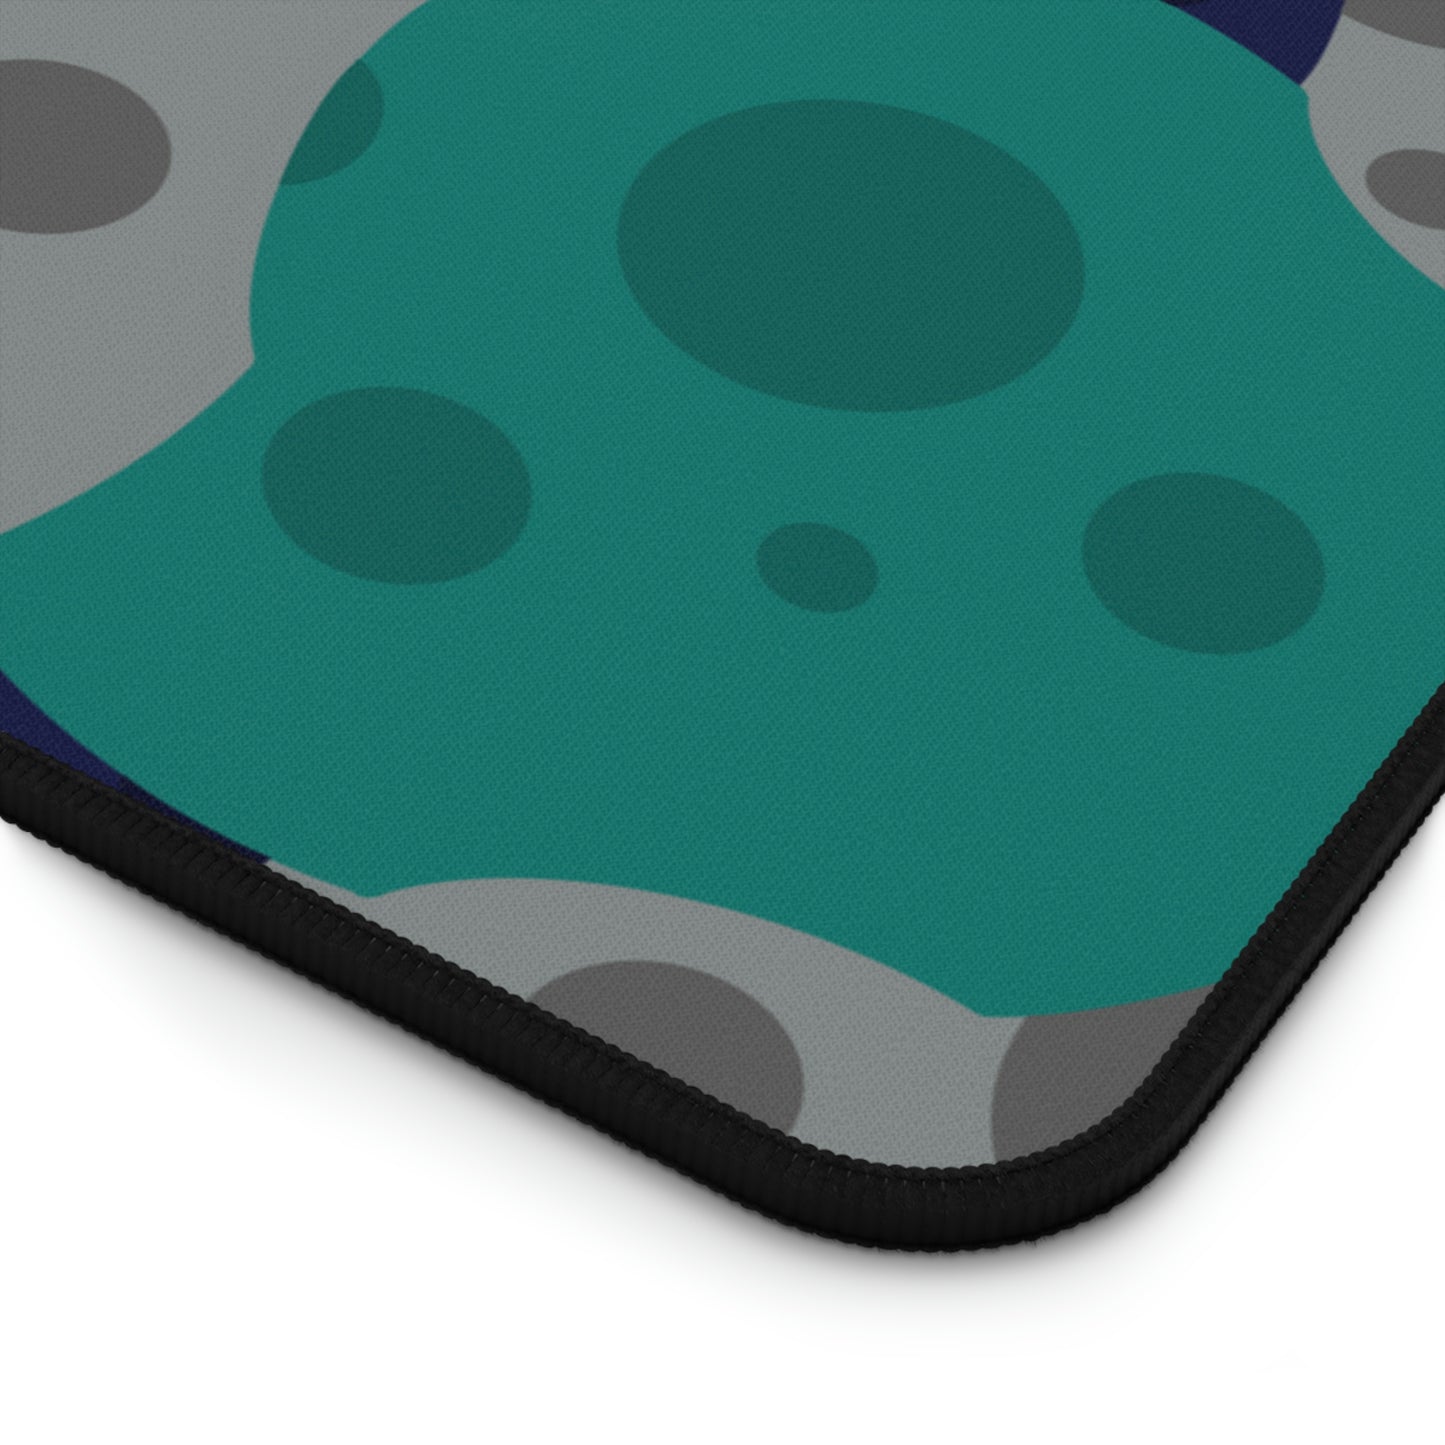 The corner of a 12" x 22" desk mat with gray, teal, and dark blue meteorites.